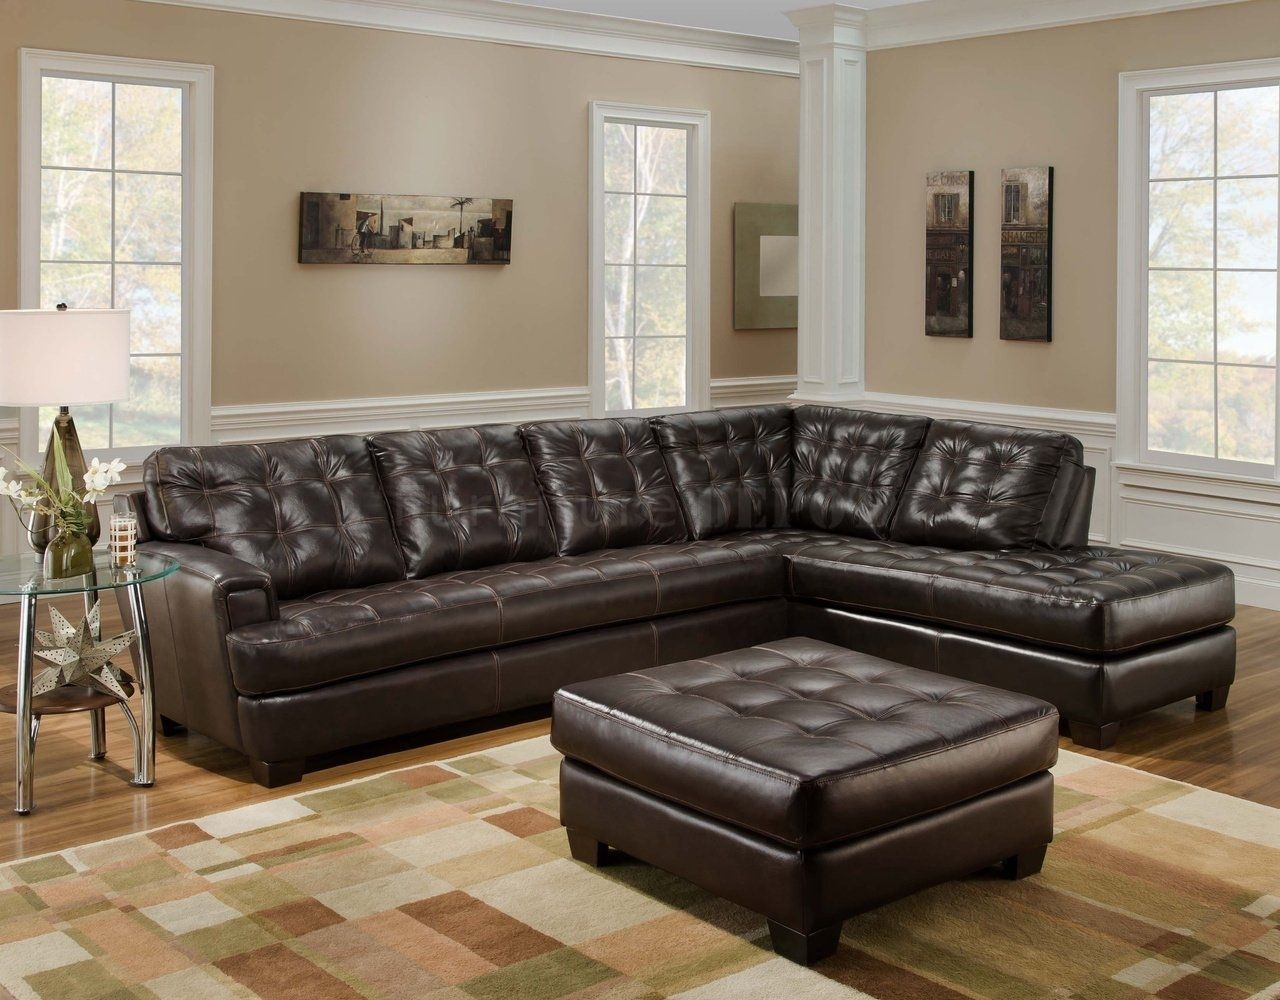 Sectional Sofa Design: Awesome Leather Sectional Sleeper Sofa Within Leather Sectionals With Chaise And Ottoman (View 2 of 15)